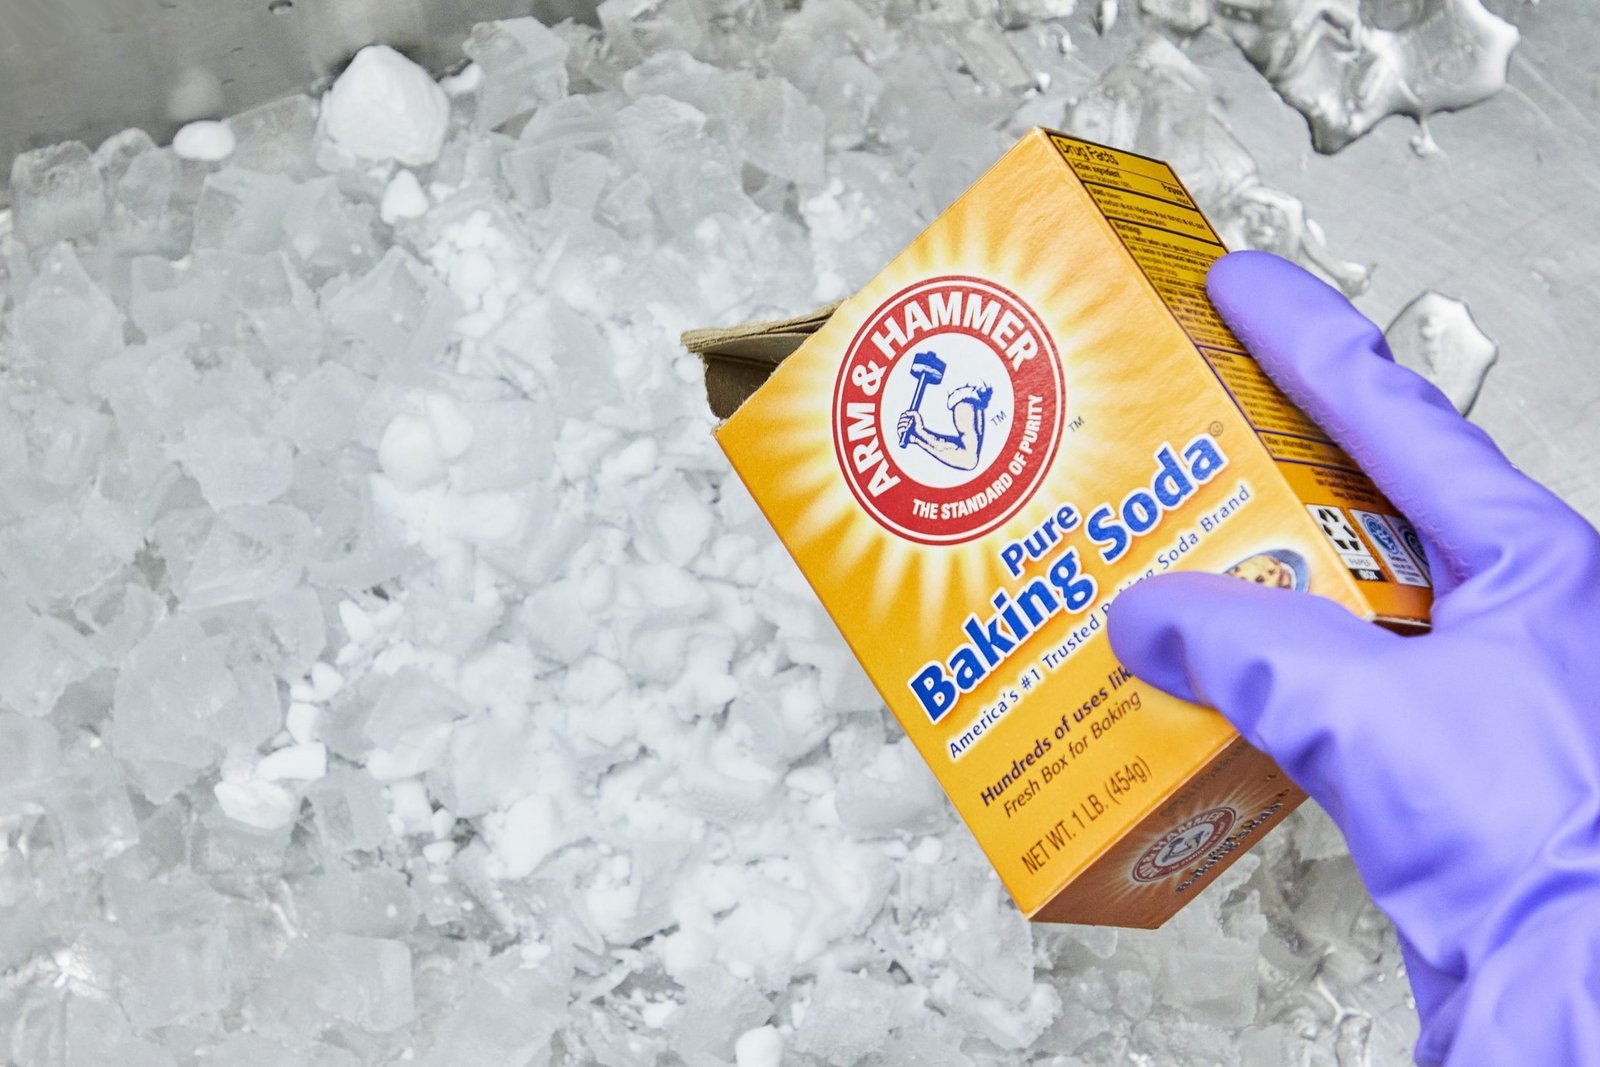 Baking Soda For Cleaning - Sodium Bicarbonate Articles